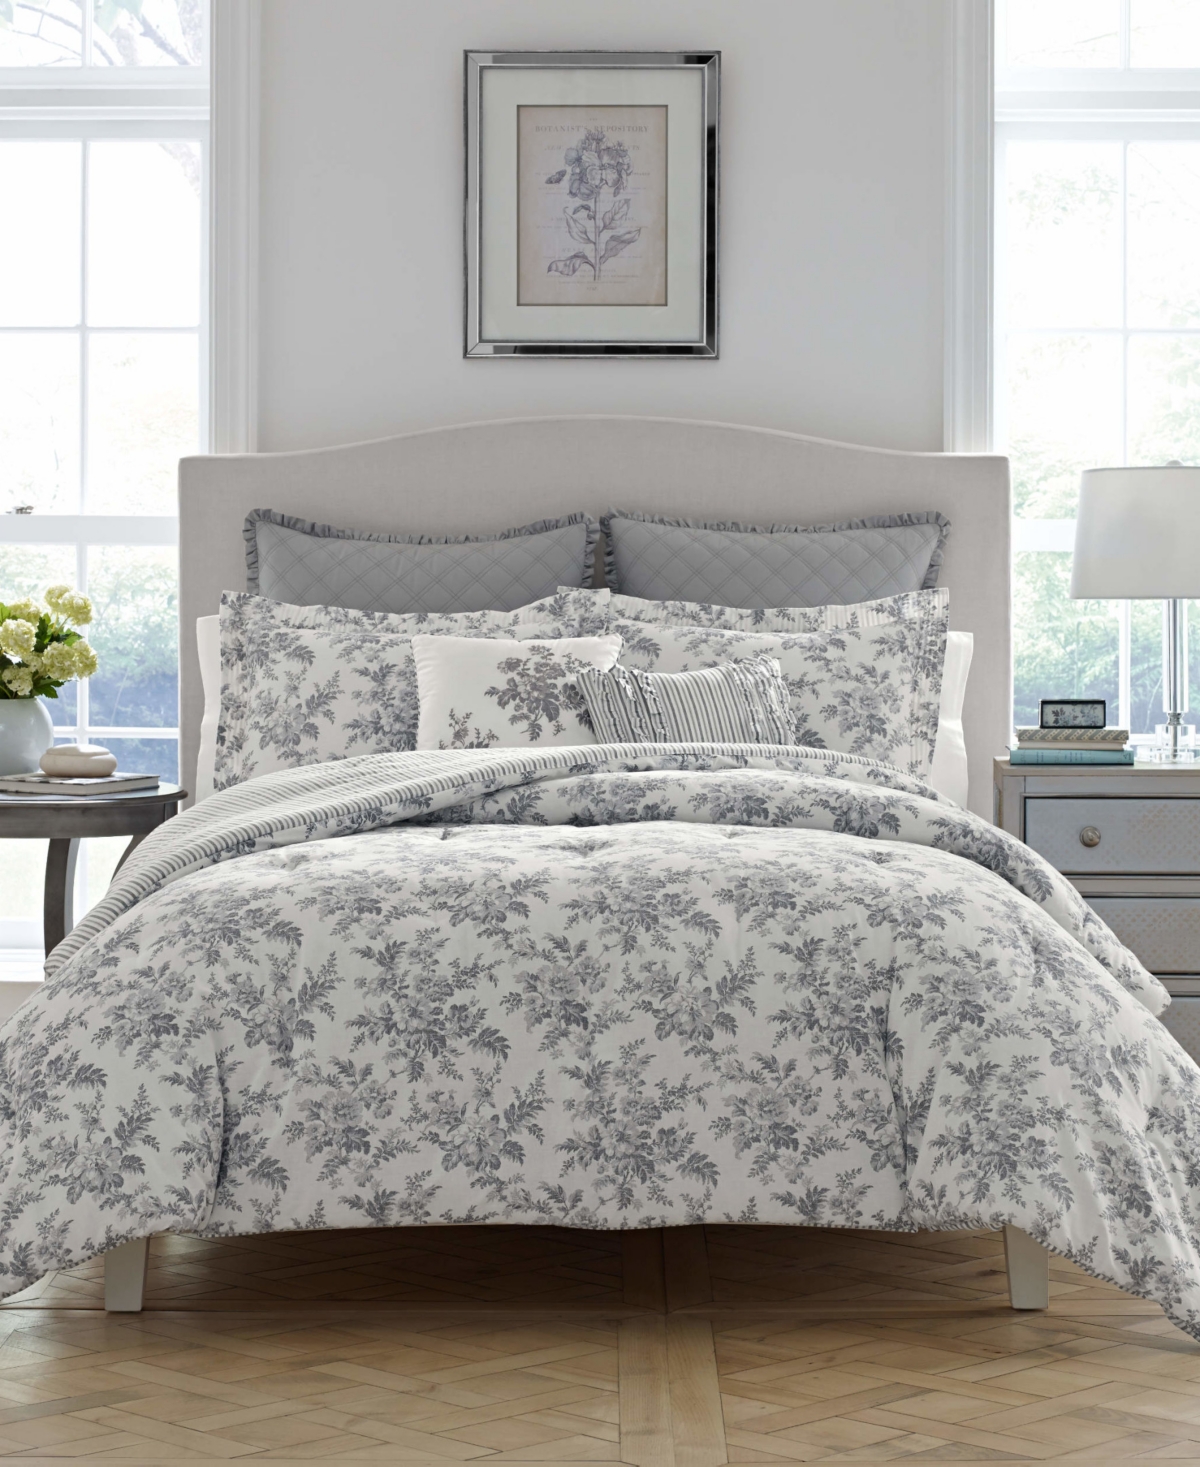 Laura Ashley Annalise Floral Cotton Reversible 7 Piece Duvet Cover Set, Full/queen In Shadow Gray